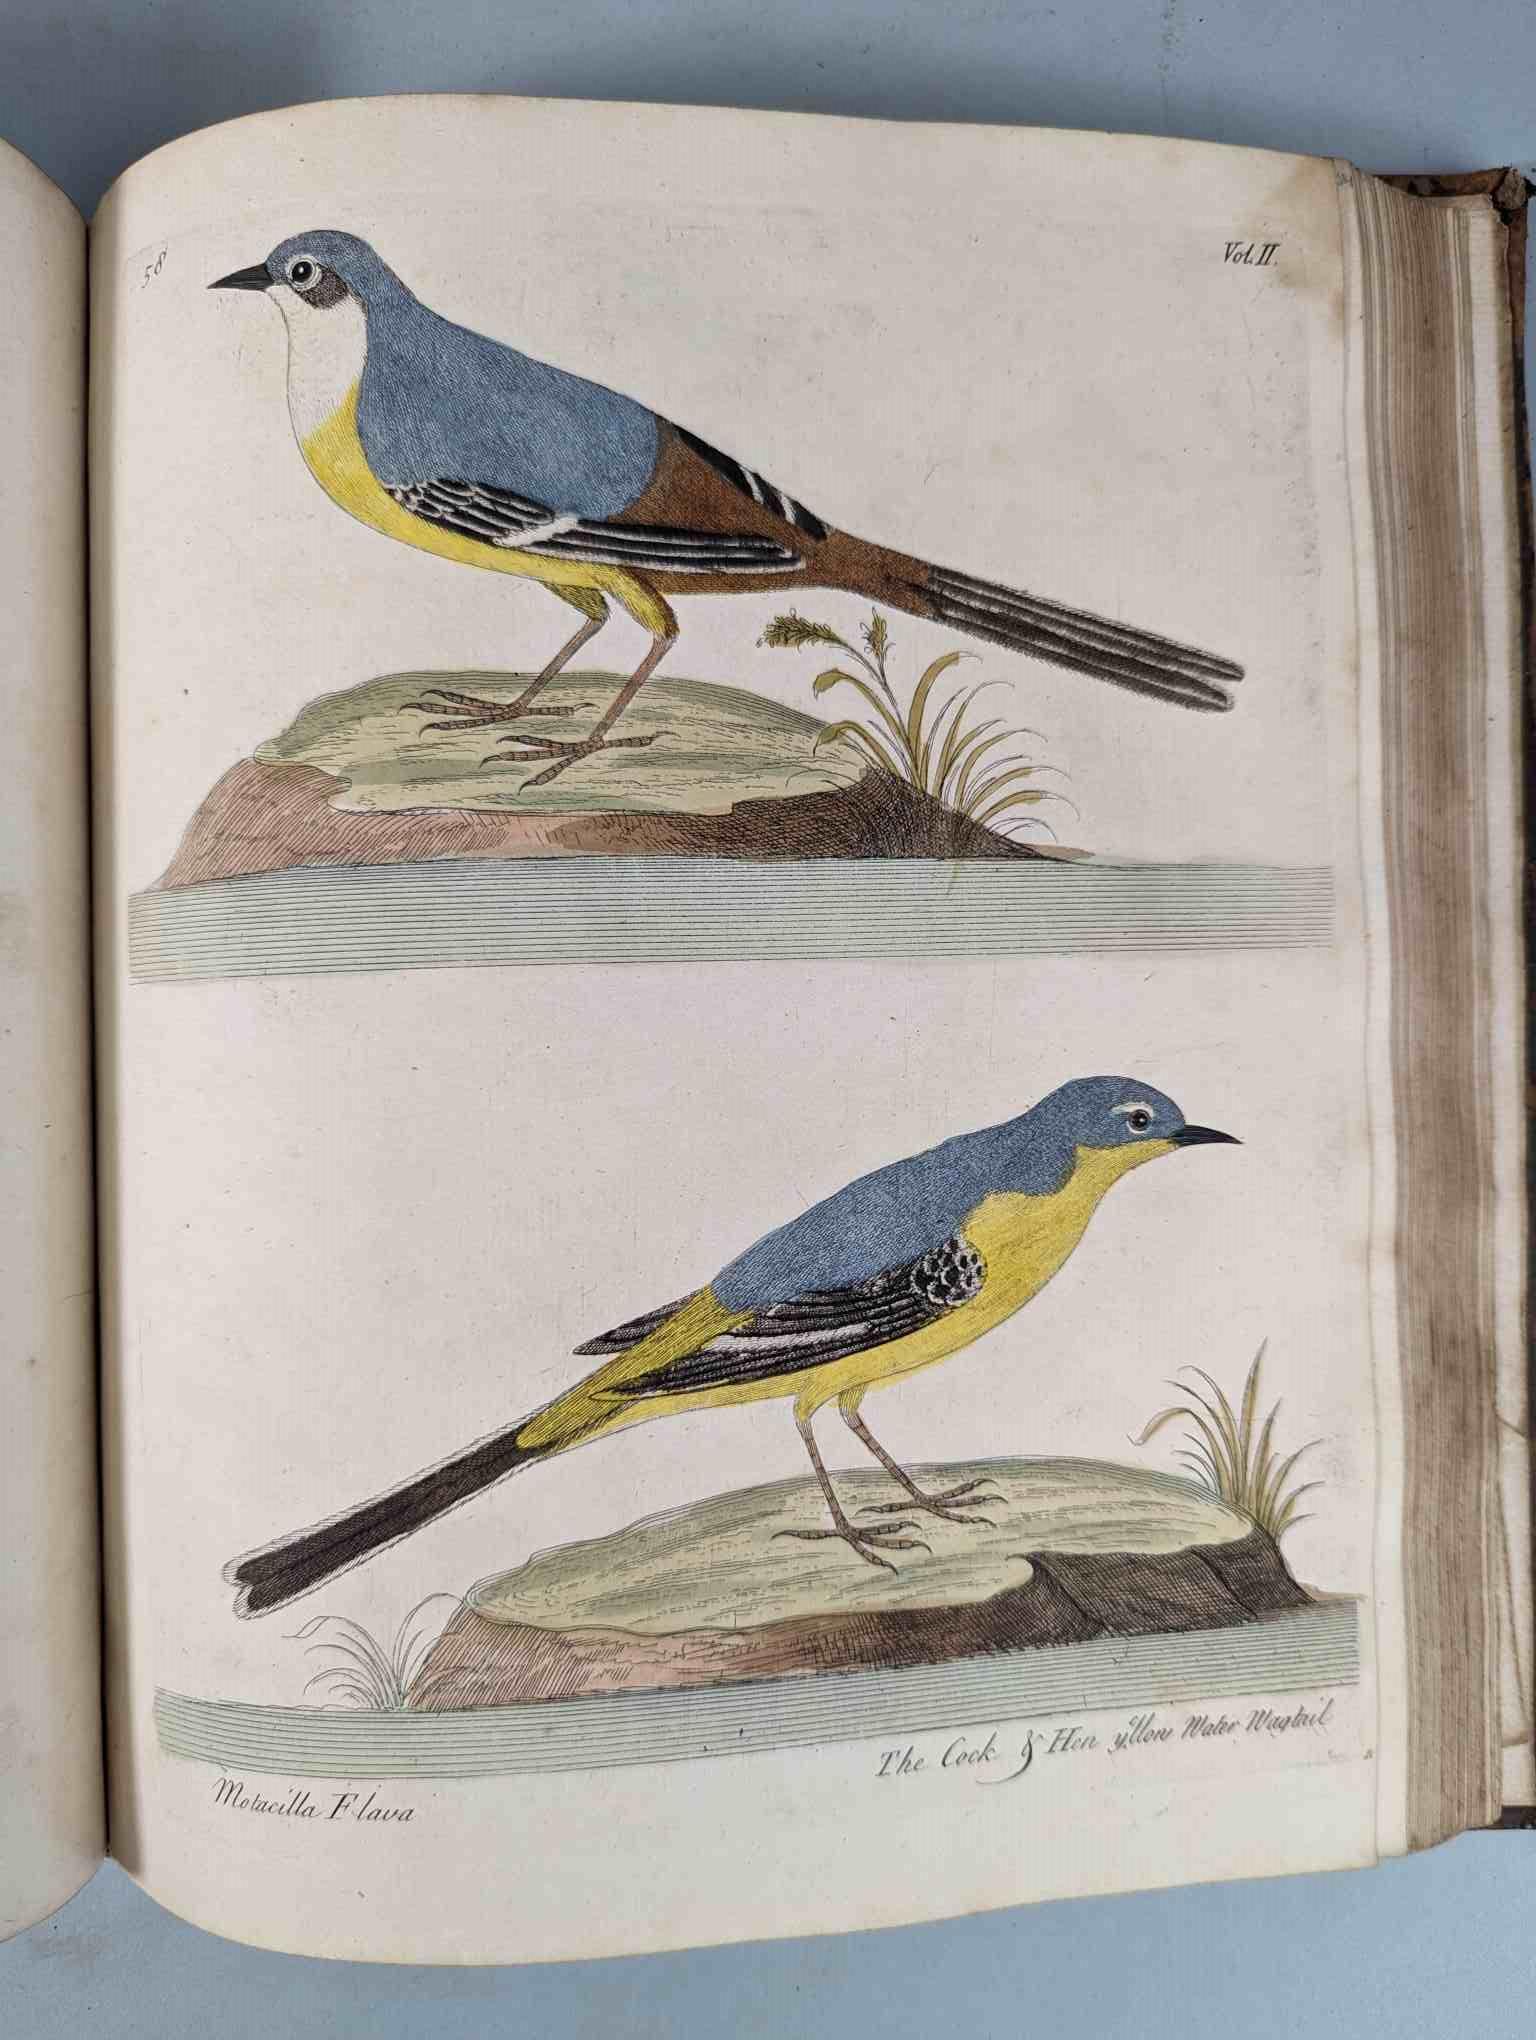 ALBIN, Eleazar. A Natural History of Birds, to which are added, Notes and Observations by W. - Image 162 of 208